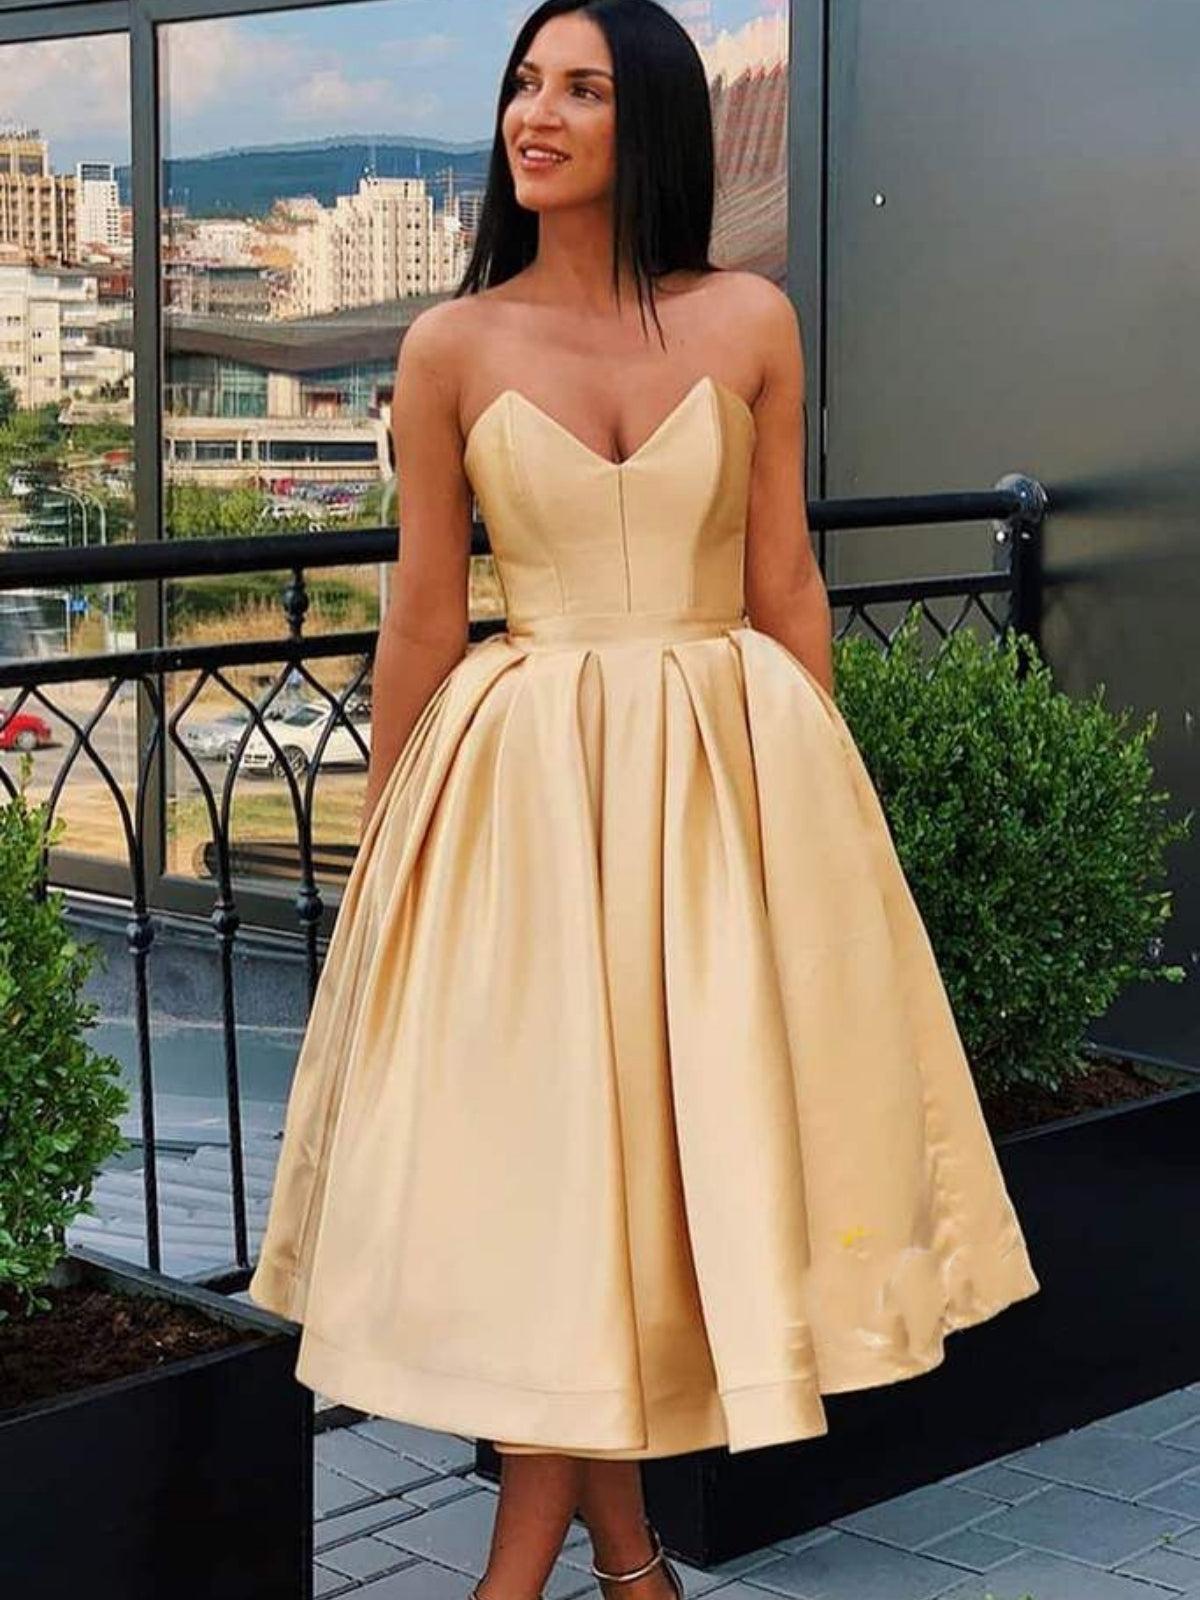 Strapless Tea Length Pink/Champagne Prom Homecoming Dresses, Pink/Champagne Formal Graduation Evening Dresses 